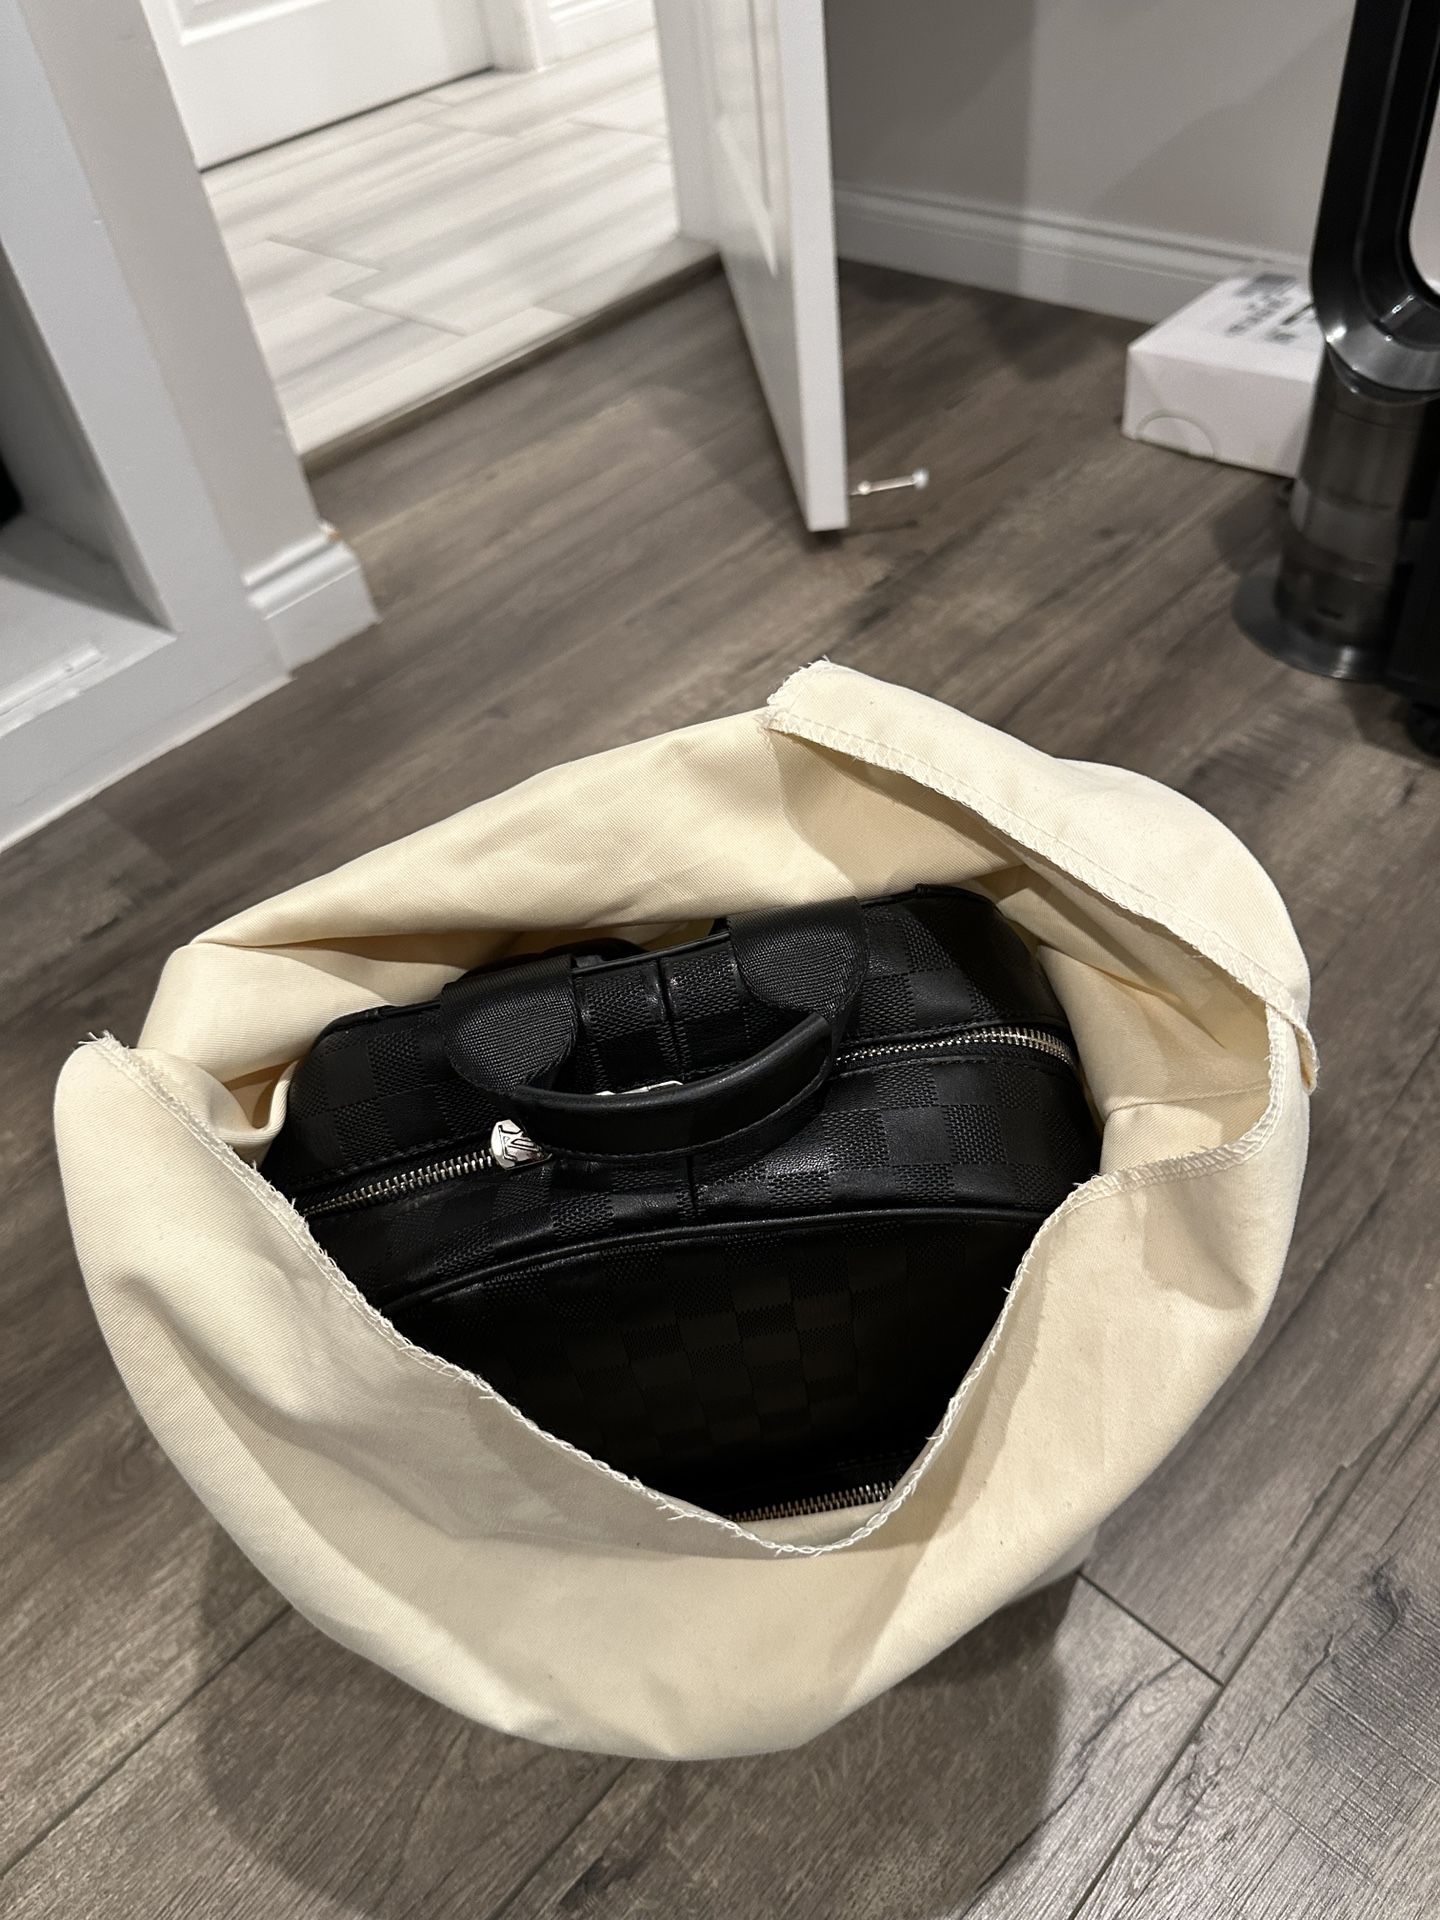 Ostrich Authentic Louis Vuitton Men Backpack for Sale in Los Angeles, CA -  OfferUp